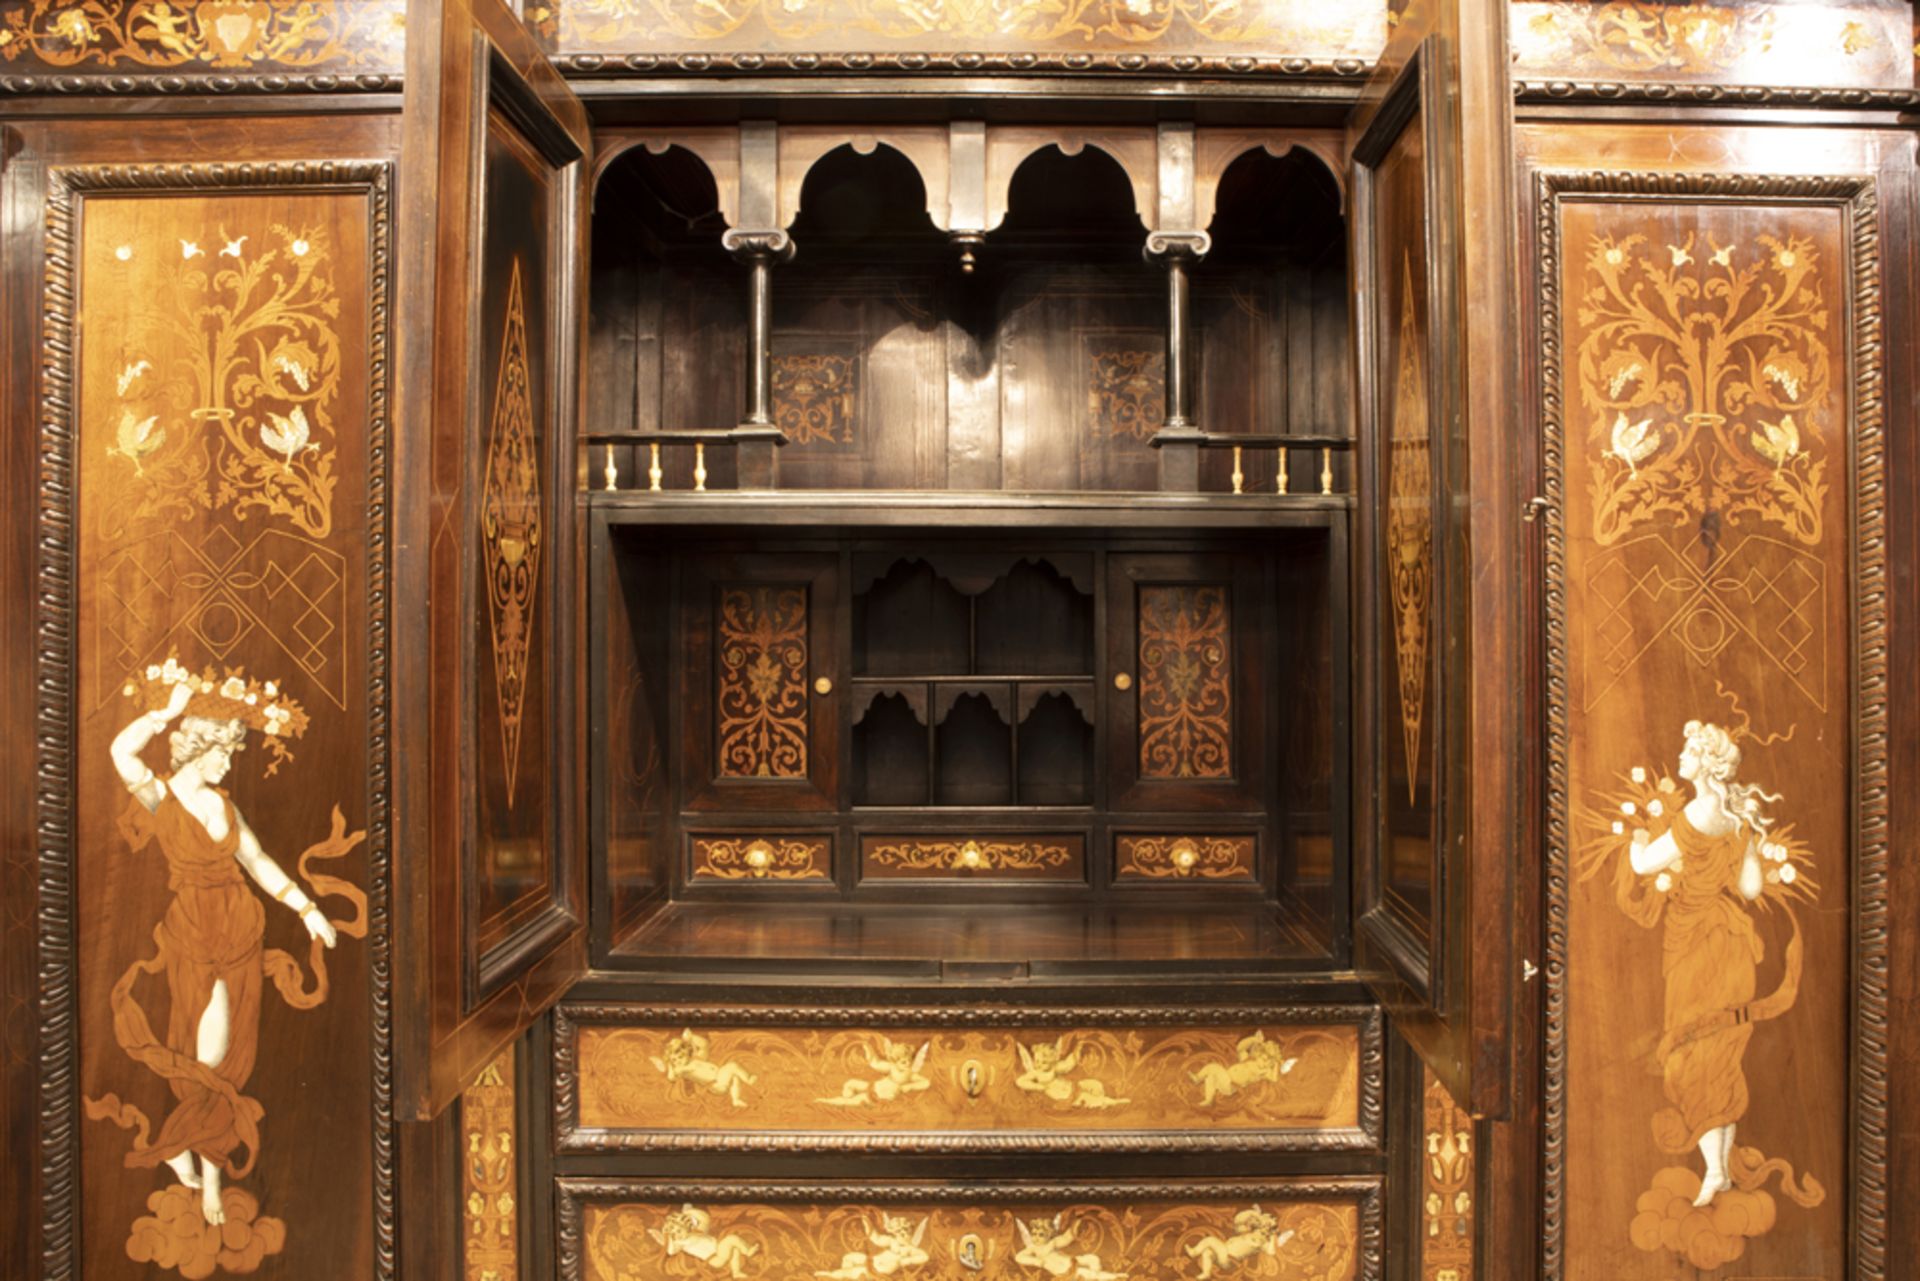 quite exceptional, antique Italian armoire (presumably from Tuscany) in walnut and rose-wood adorned - Image 3 of 7